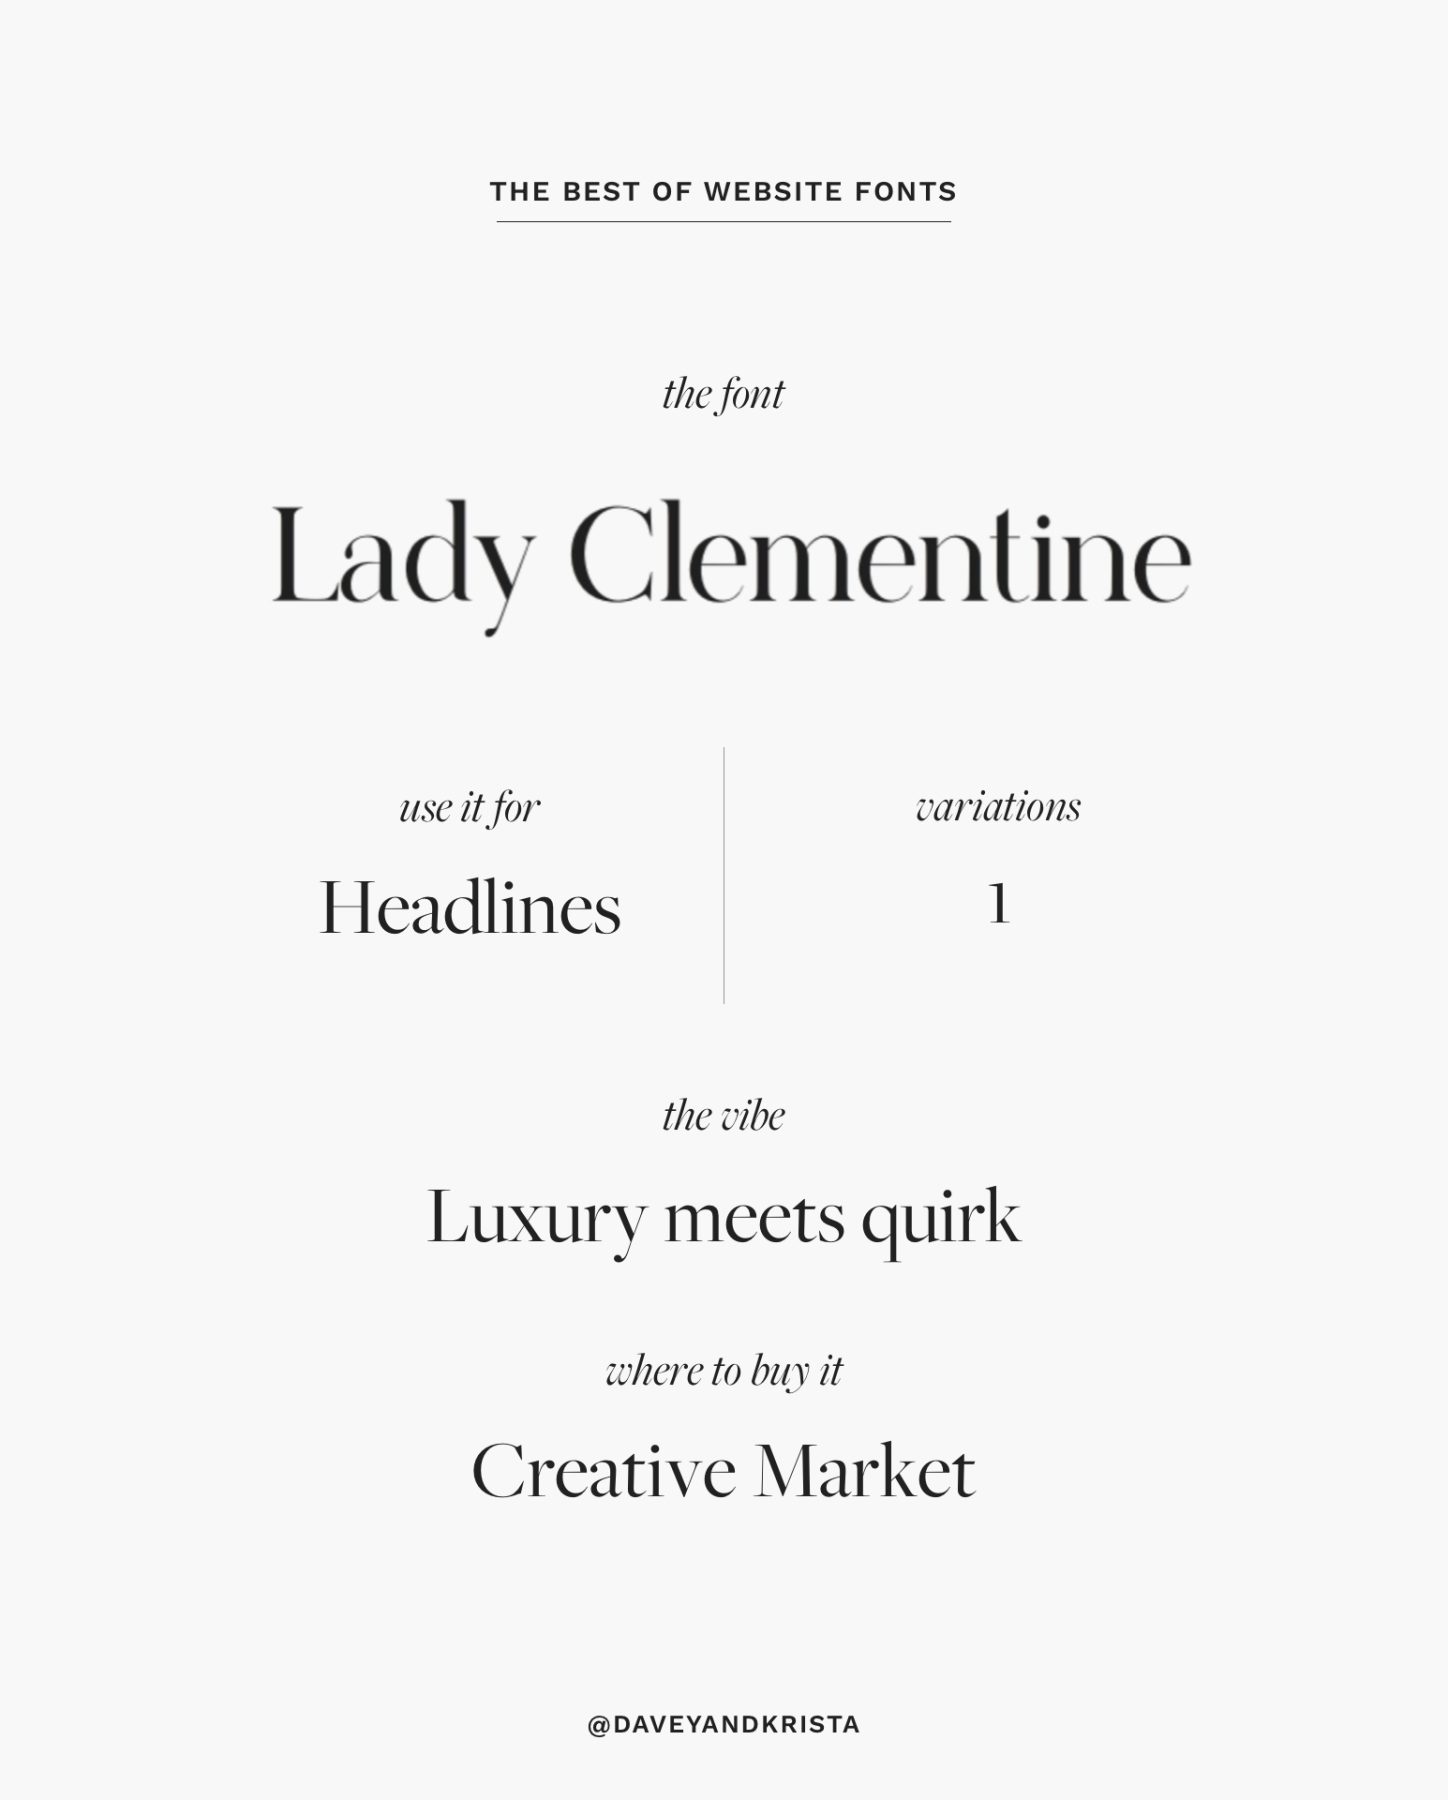 Lady Clementine - a luxurious font for websites | The Best Fonts for Websites